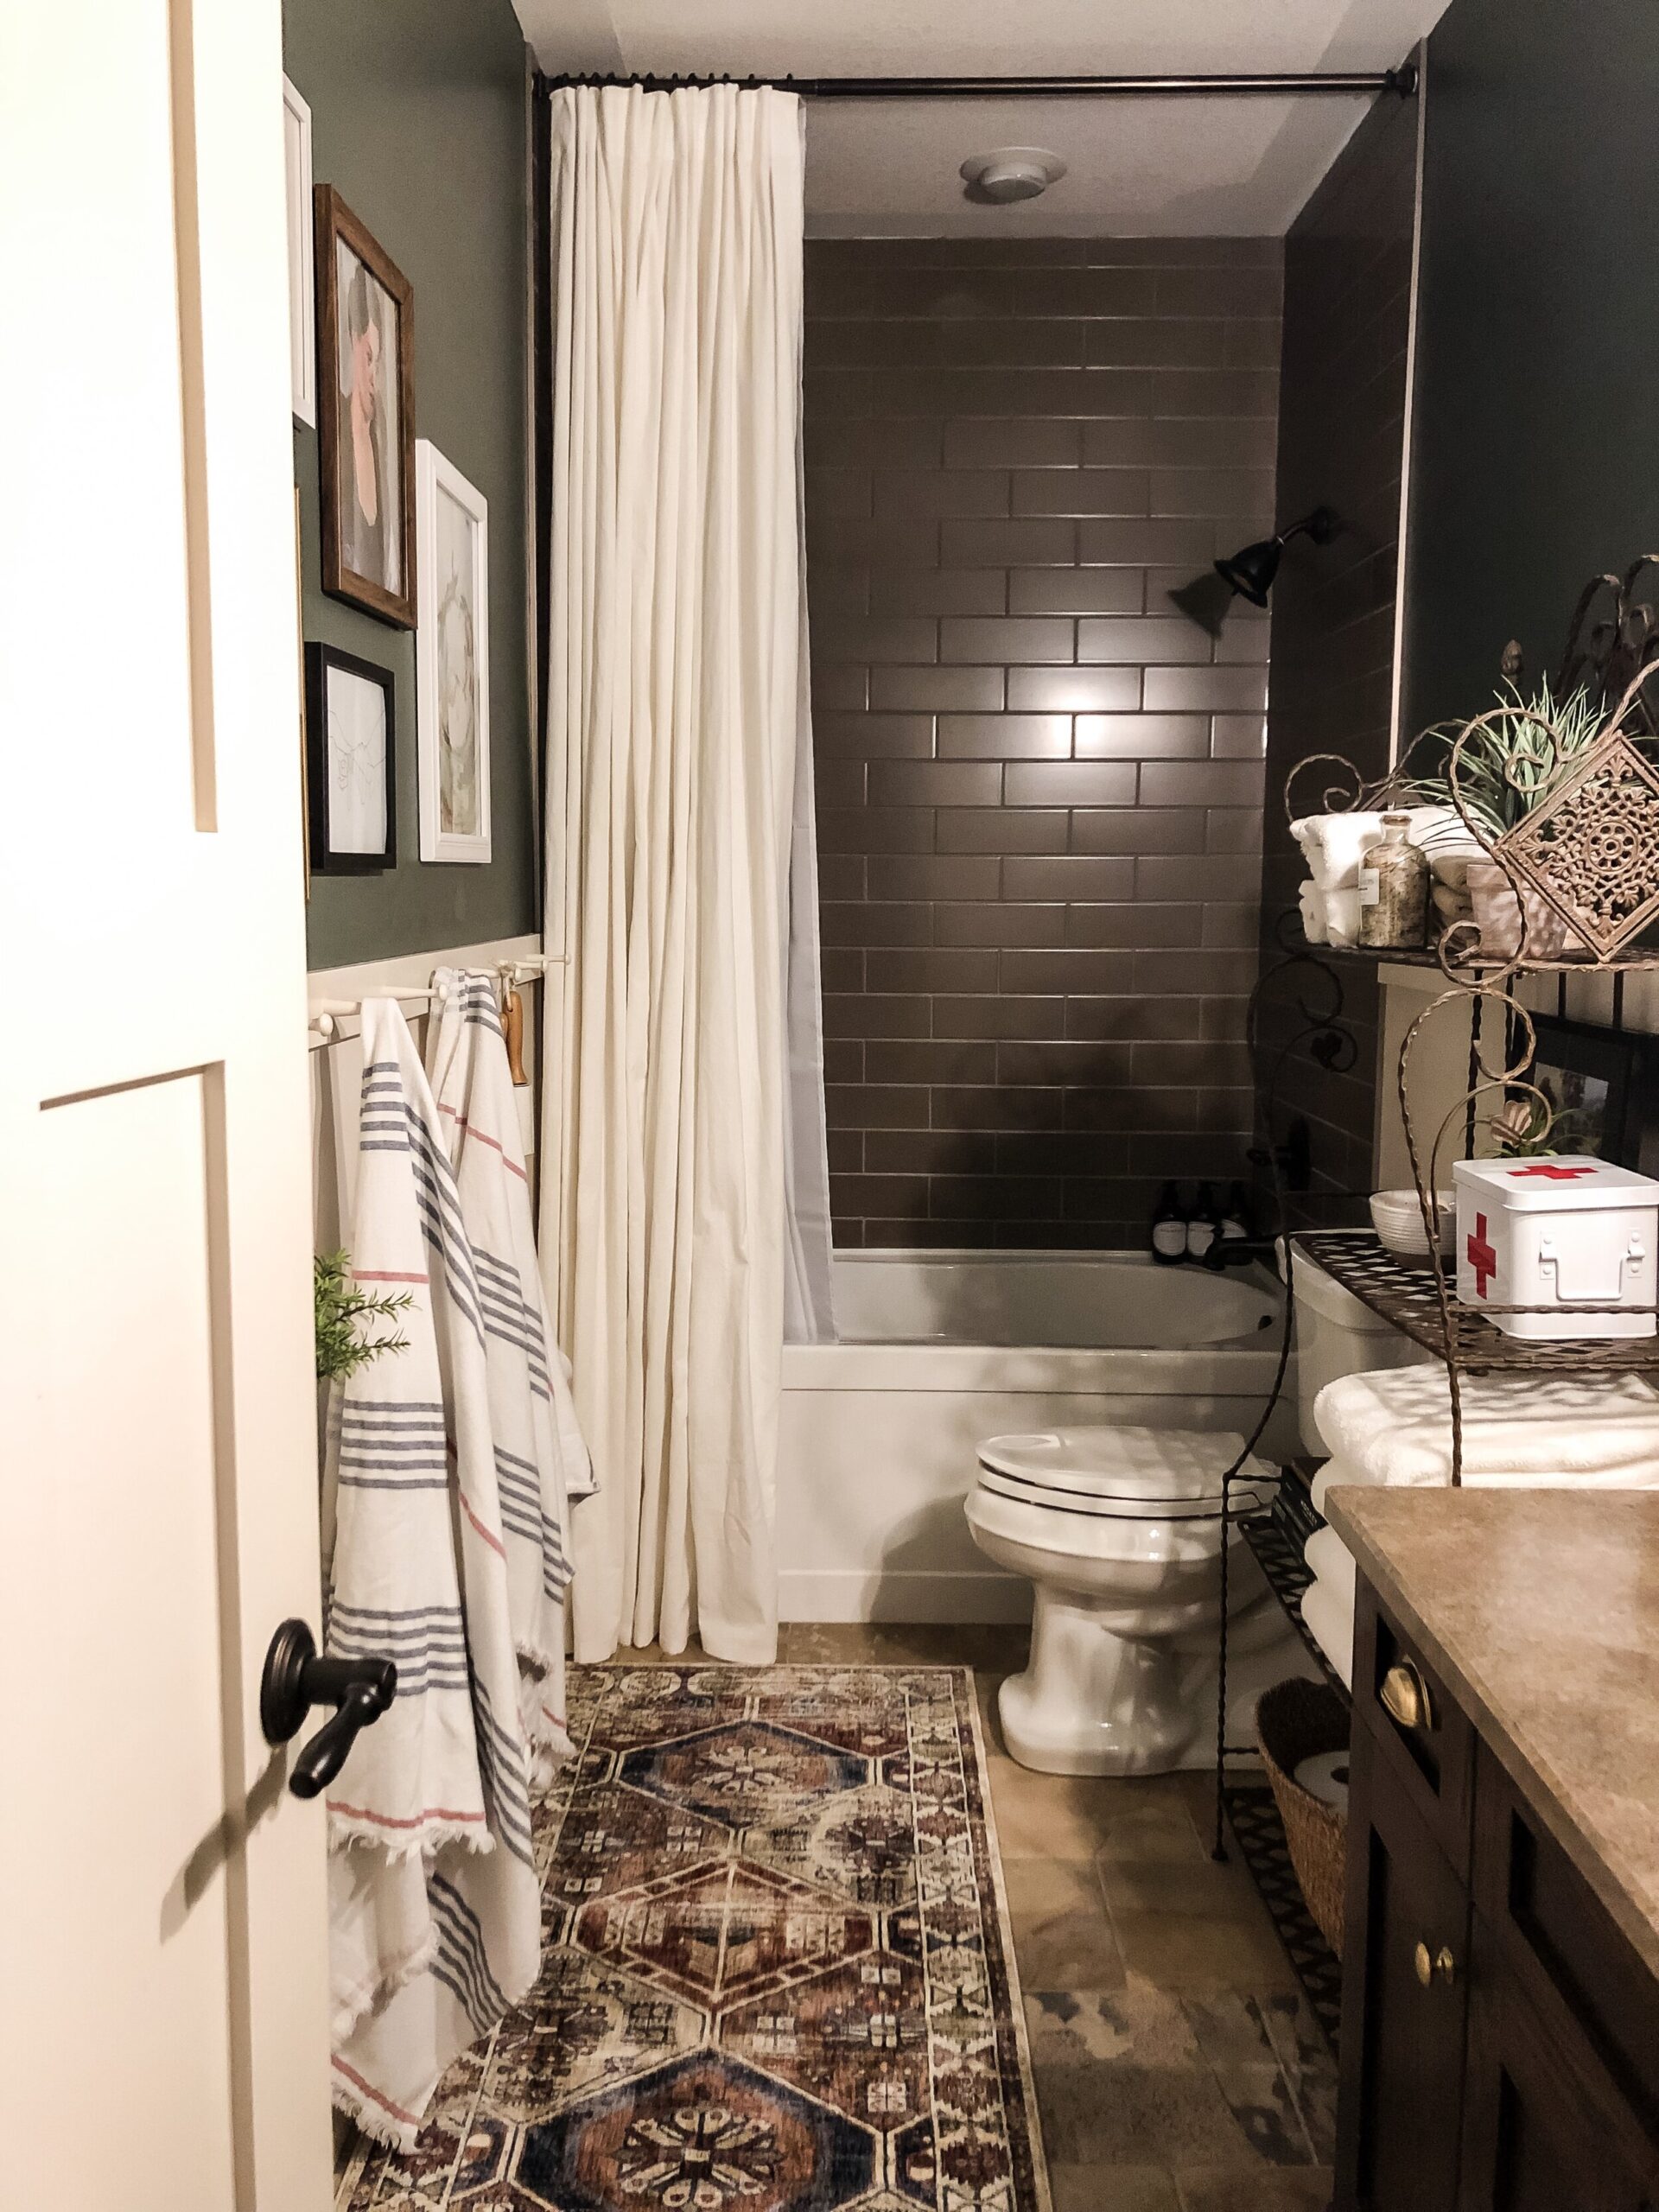 Full length shower curtain in white with brown subway tile and green walls with white wainscotting and a vintage style rug